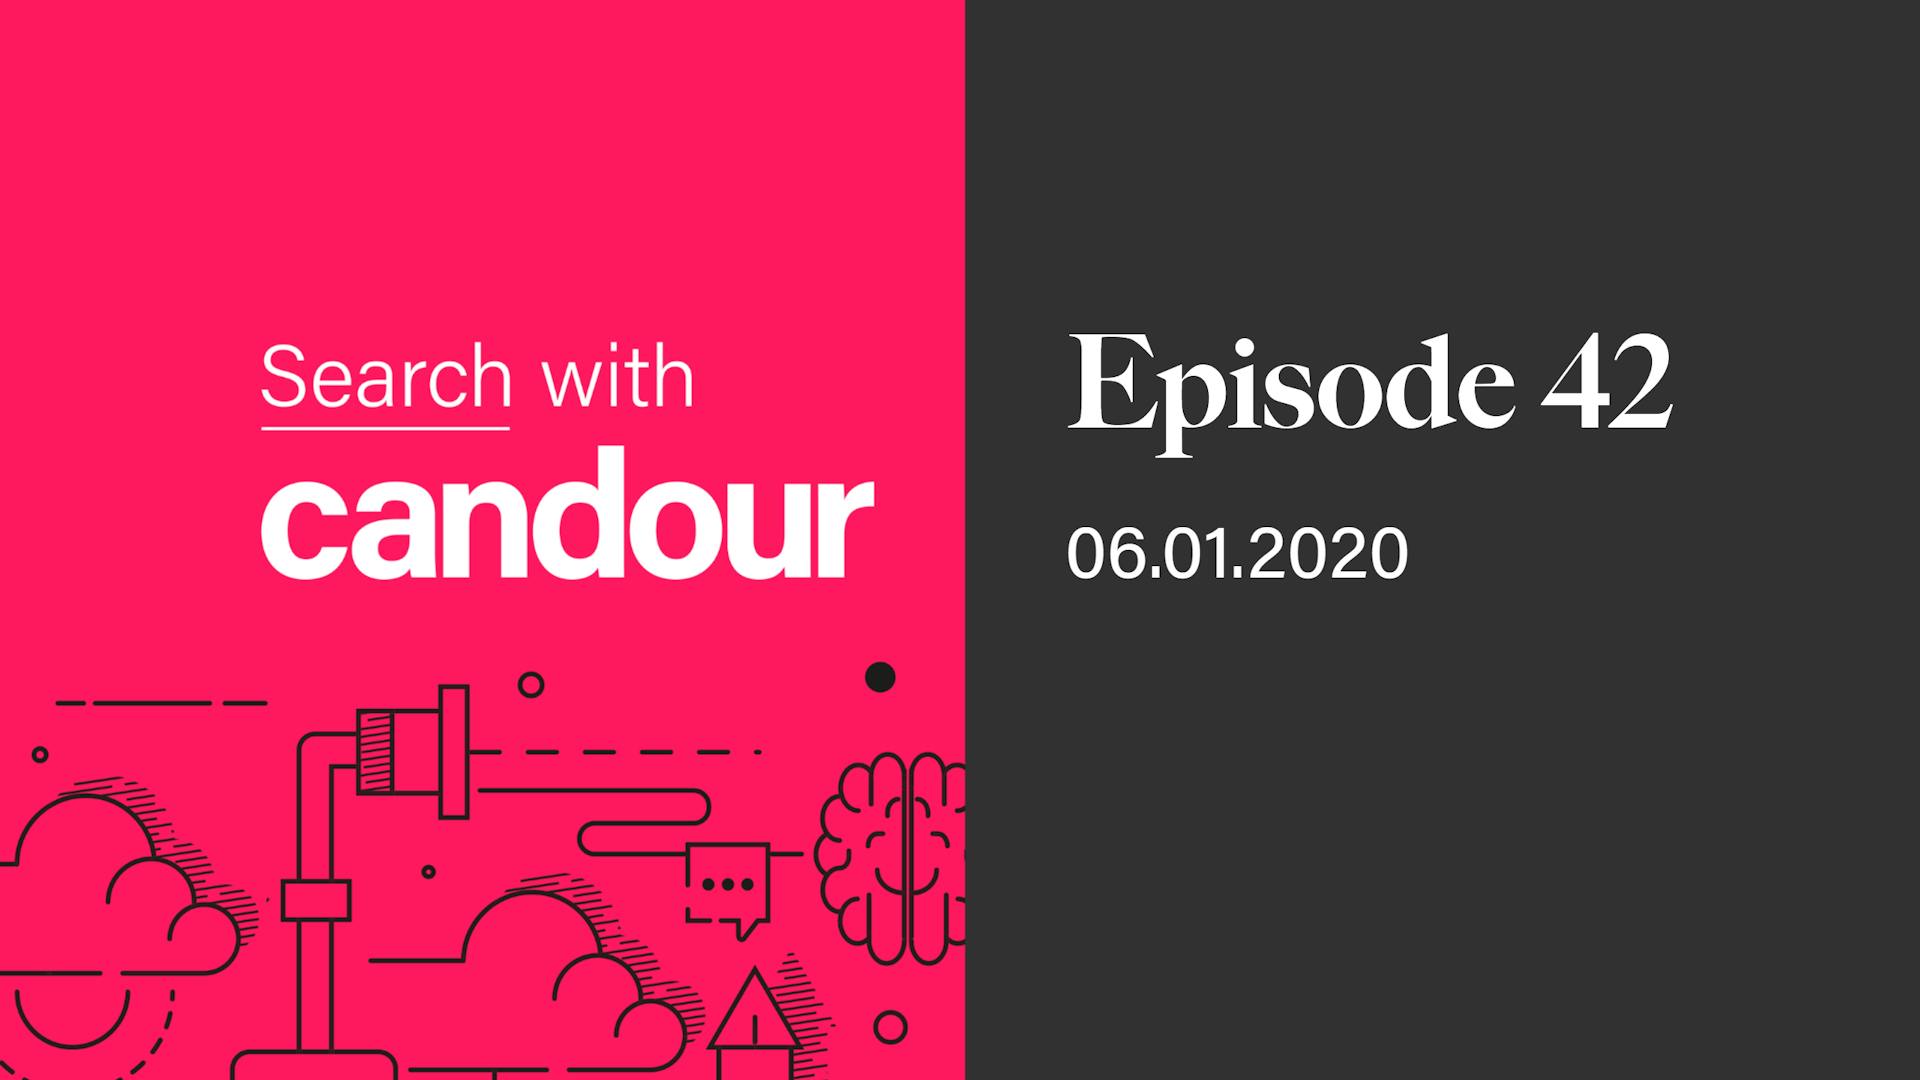 Search with Candour Episode 42